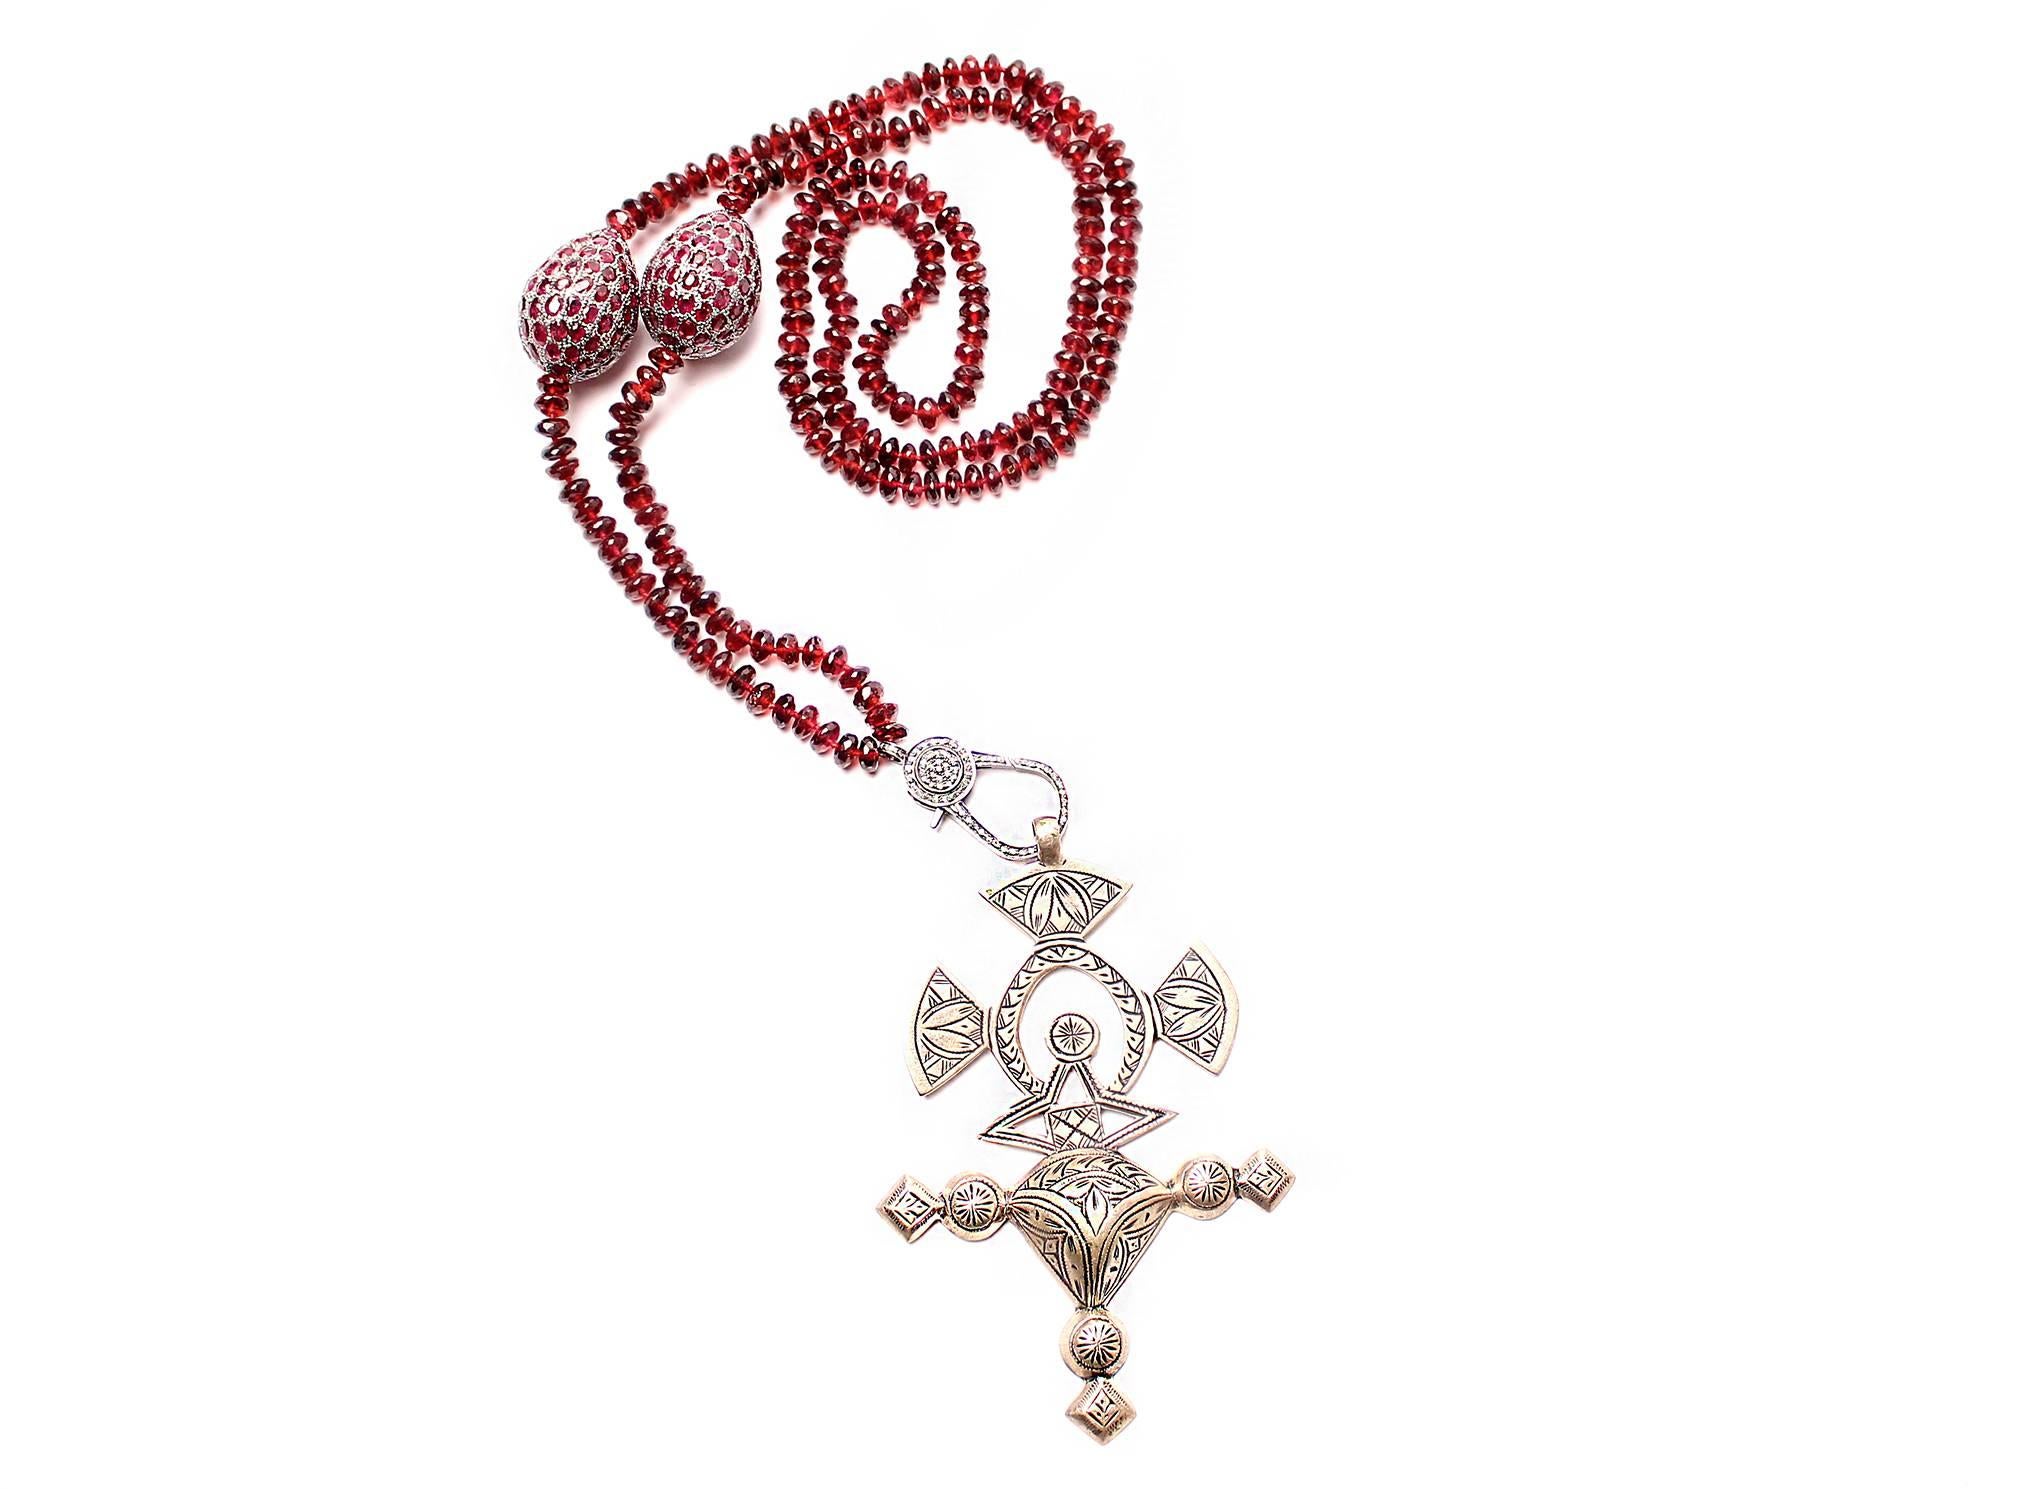 Necklace consists of garnet beads, with garnet and silver tumblers, a diamond clasp, with an antique silver Ethiopian cross pendant.